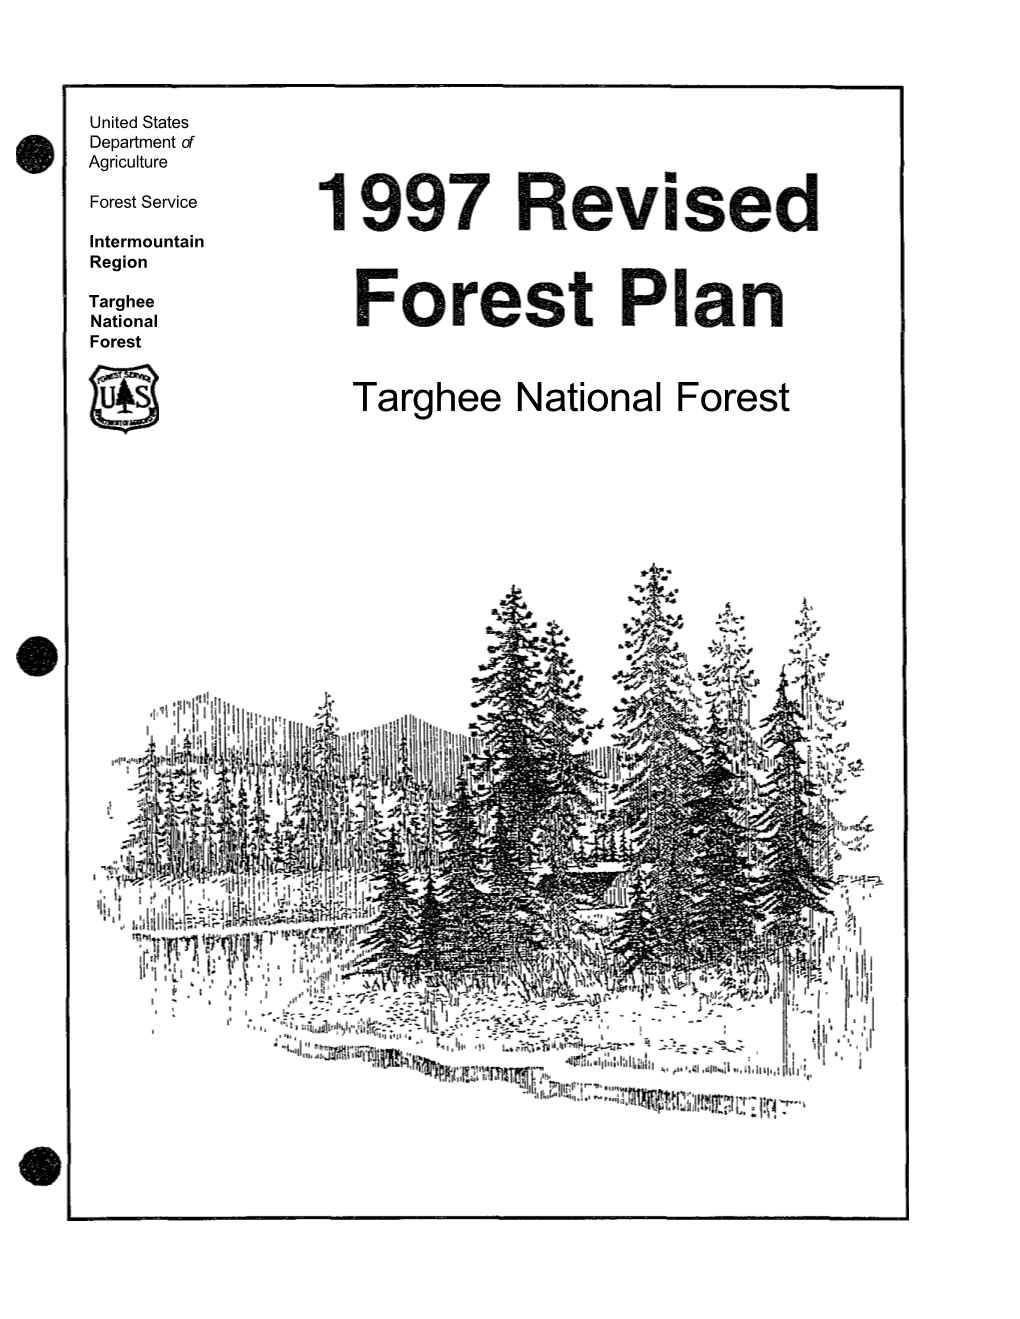 Targhee National Forest Targhee National Forest LIST of ACRONYMS USED in the REVISED FOREST PLAN